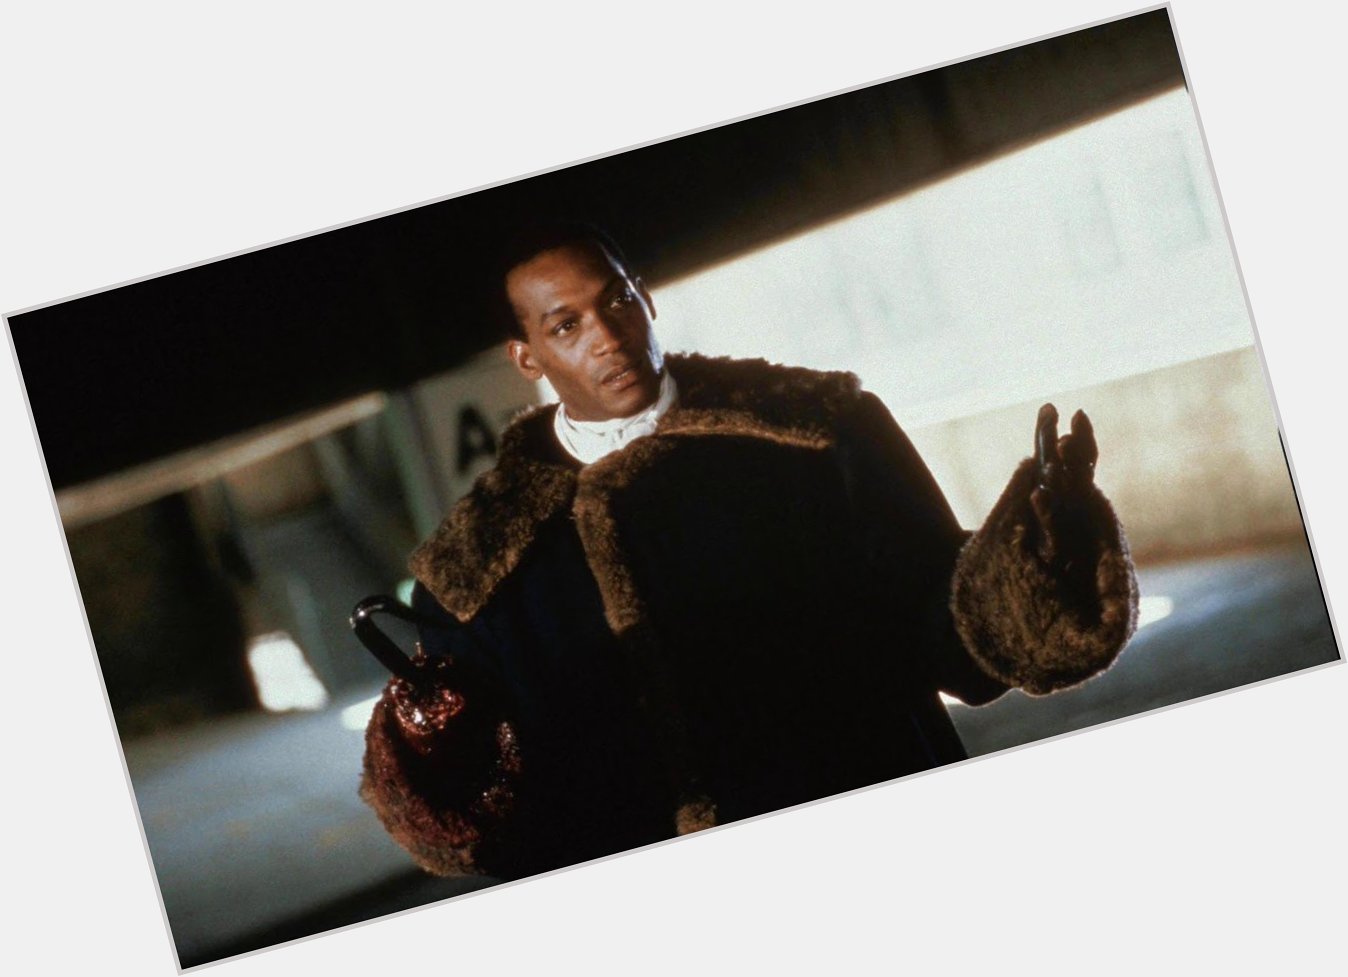 Happy birthday to a king of horror, Tony Todd. Can\t wait for his return in the new Candyman film. 